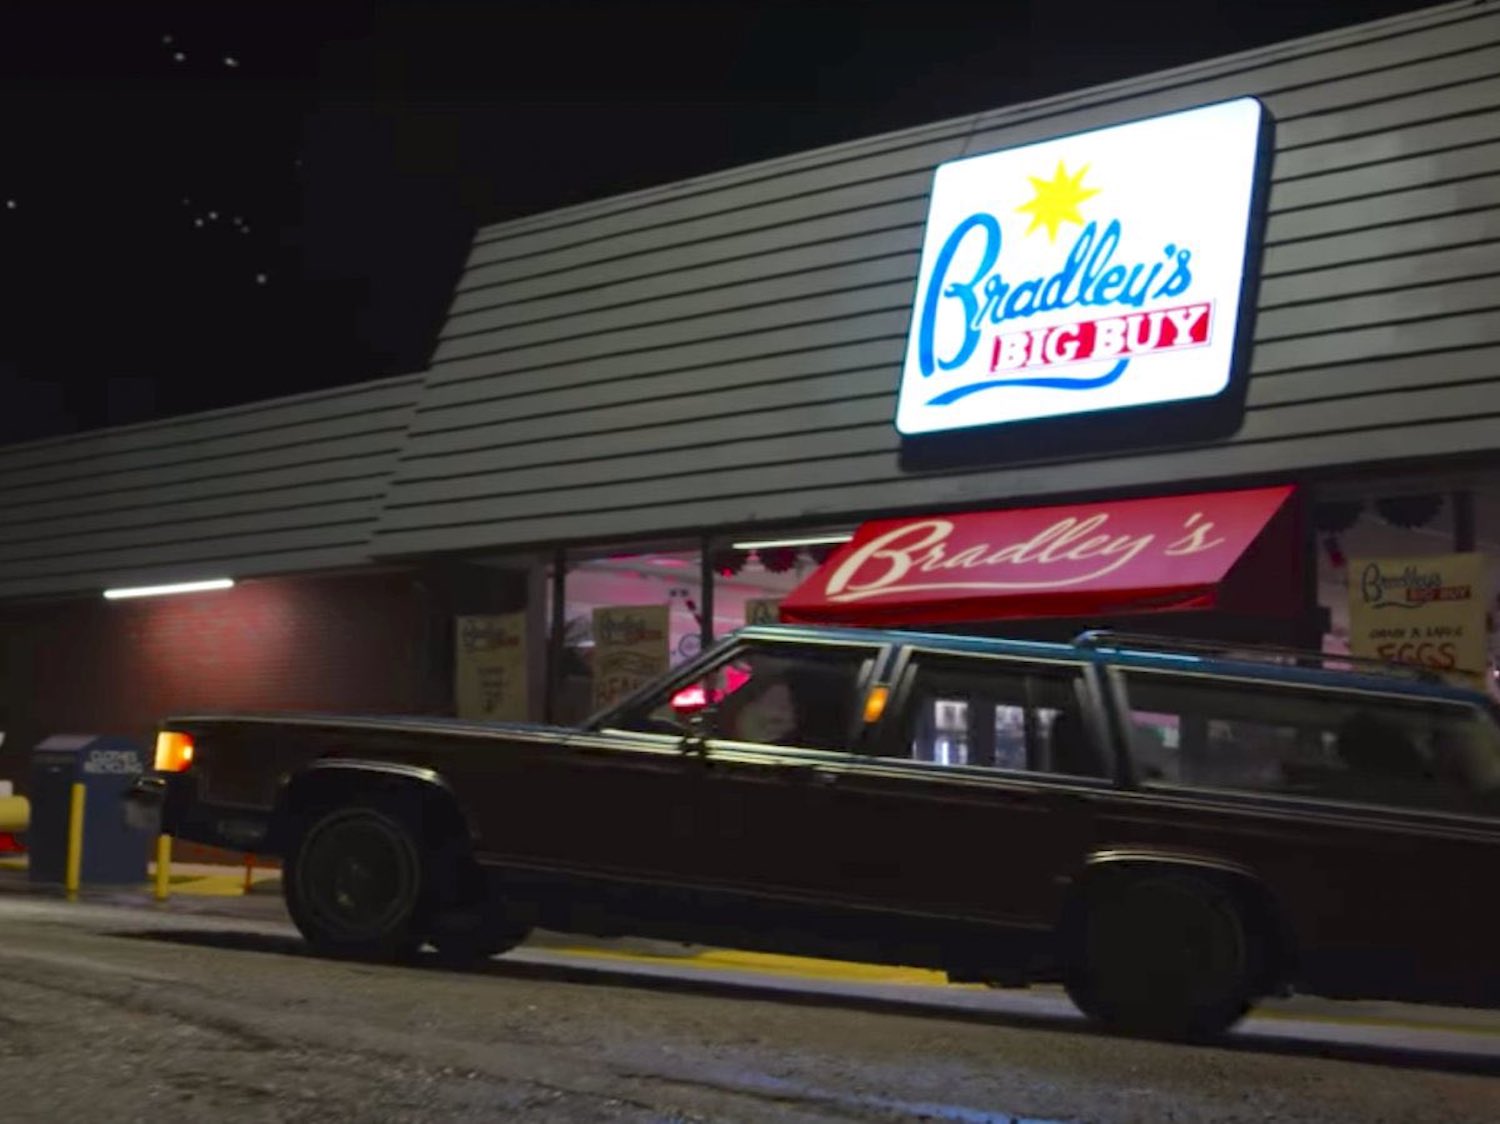 A Mercury Station Wagon turning around on a street at night, a grocery store visible in the background.